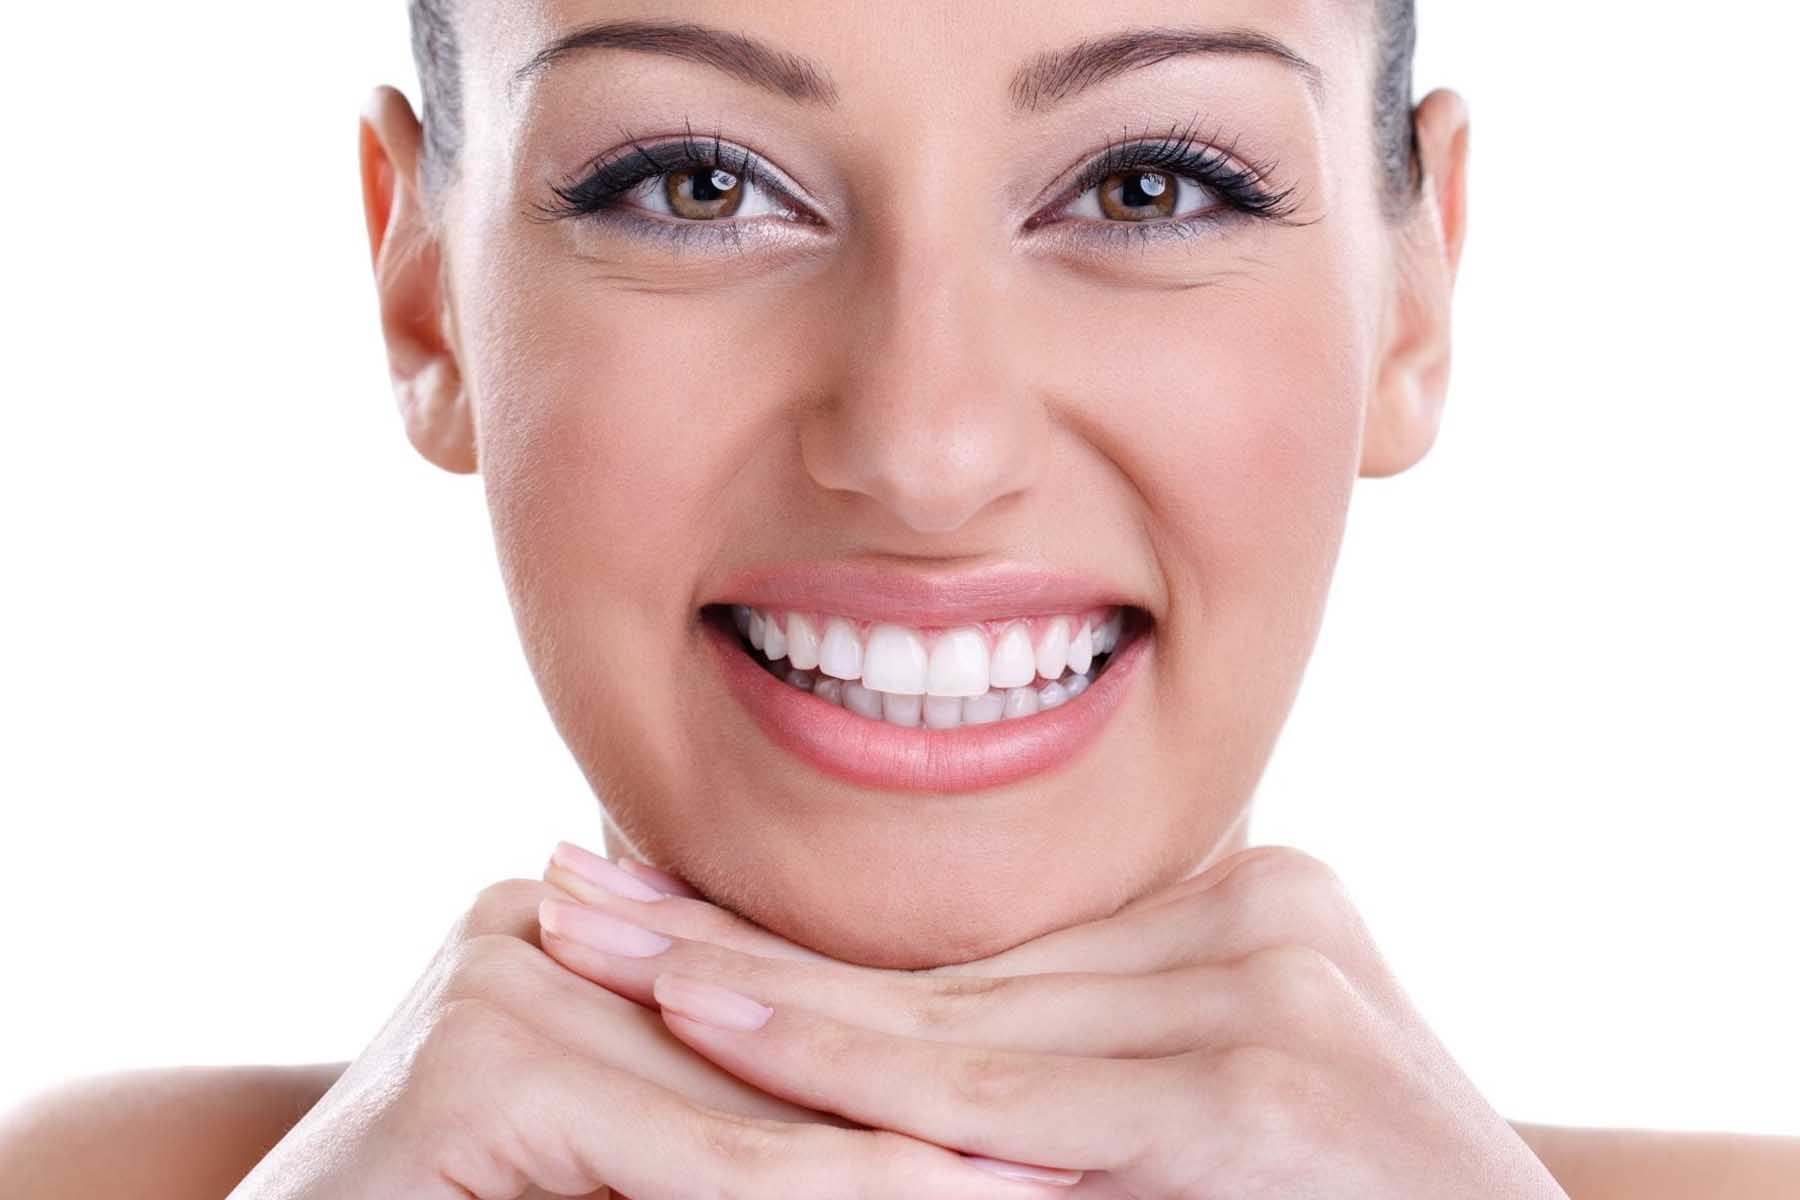 Can You Improve Appearance of Teeth?